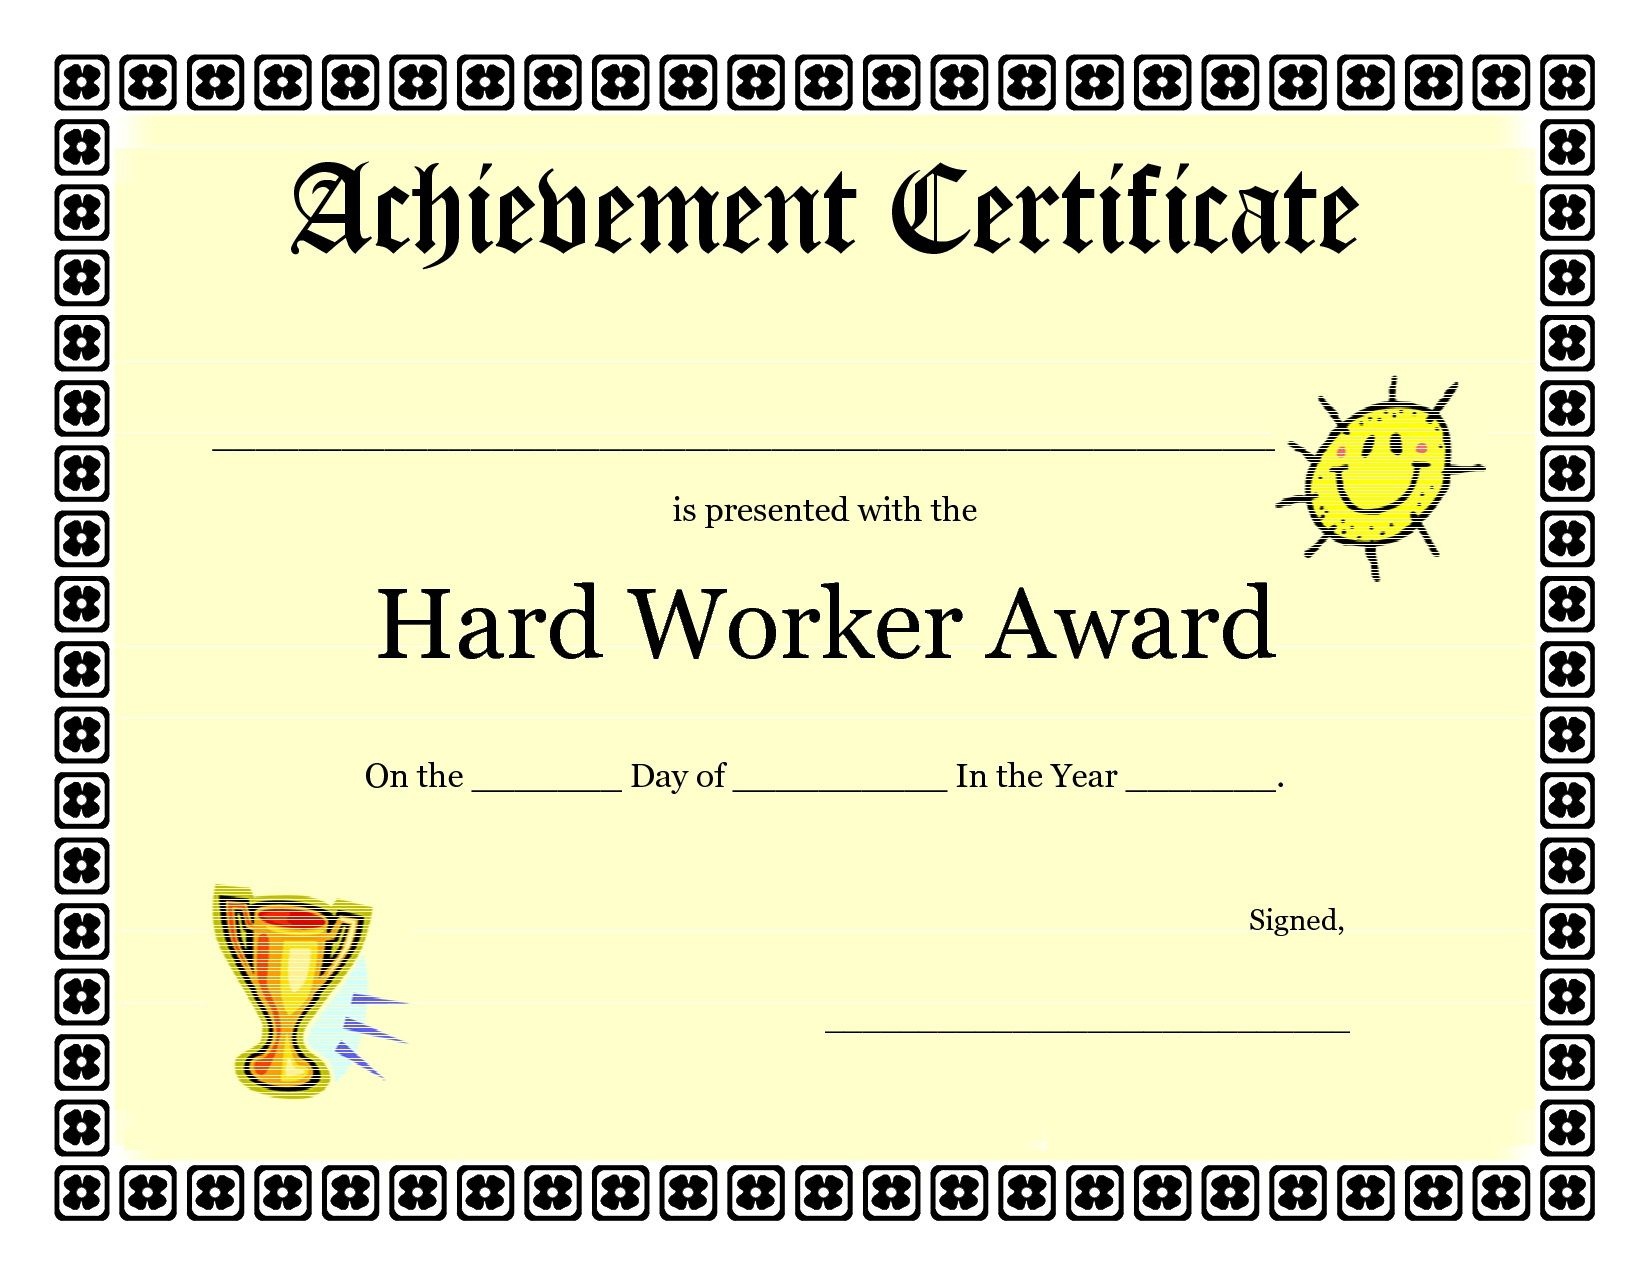 end-of-the-year-awards-44-printable-certificates-squarehead